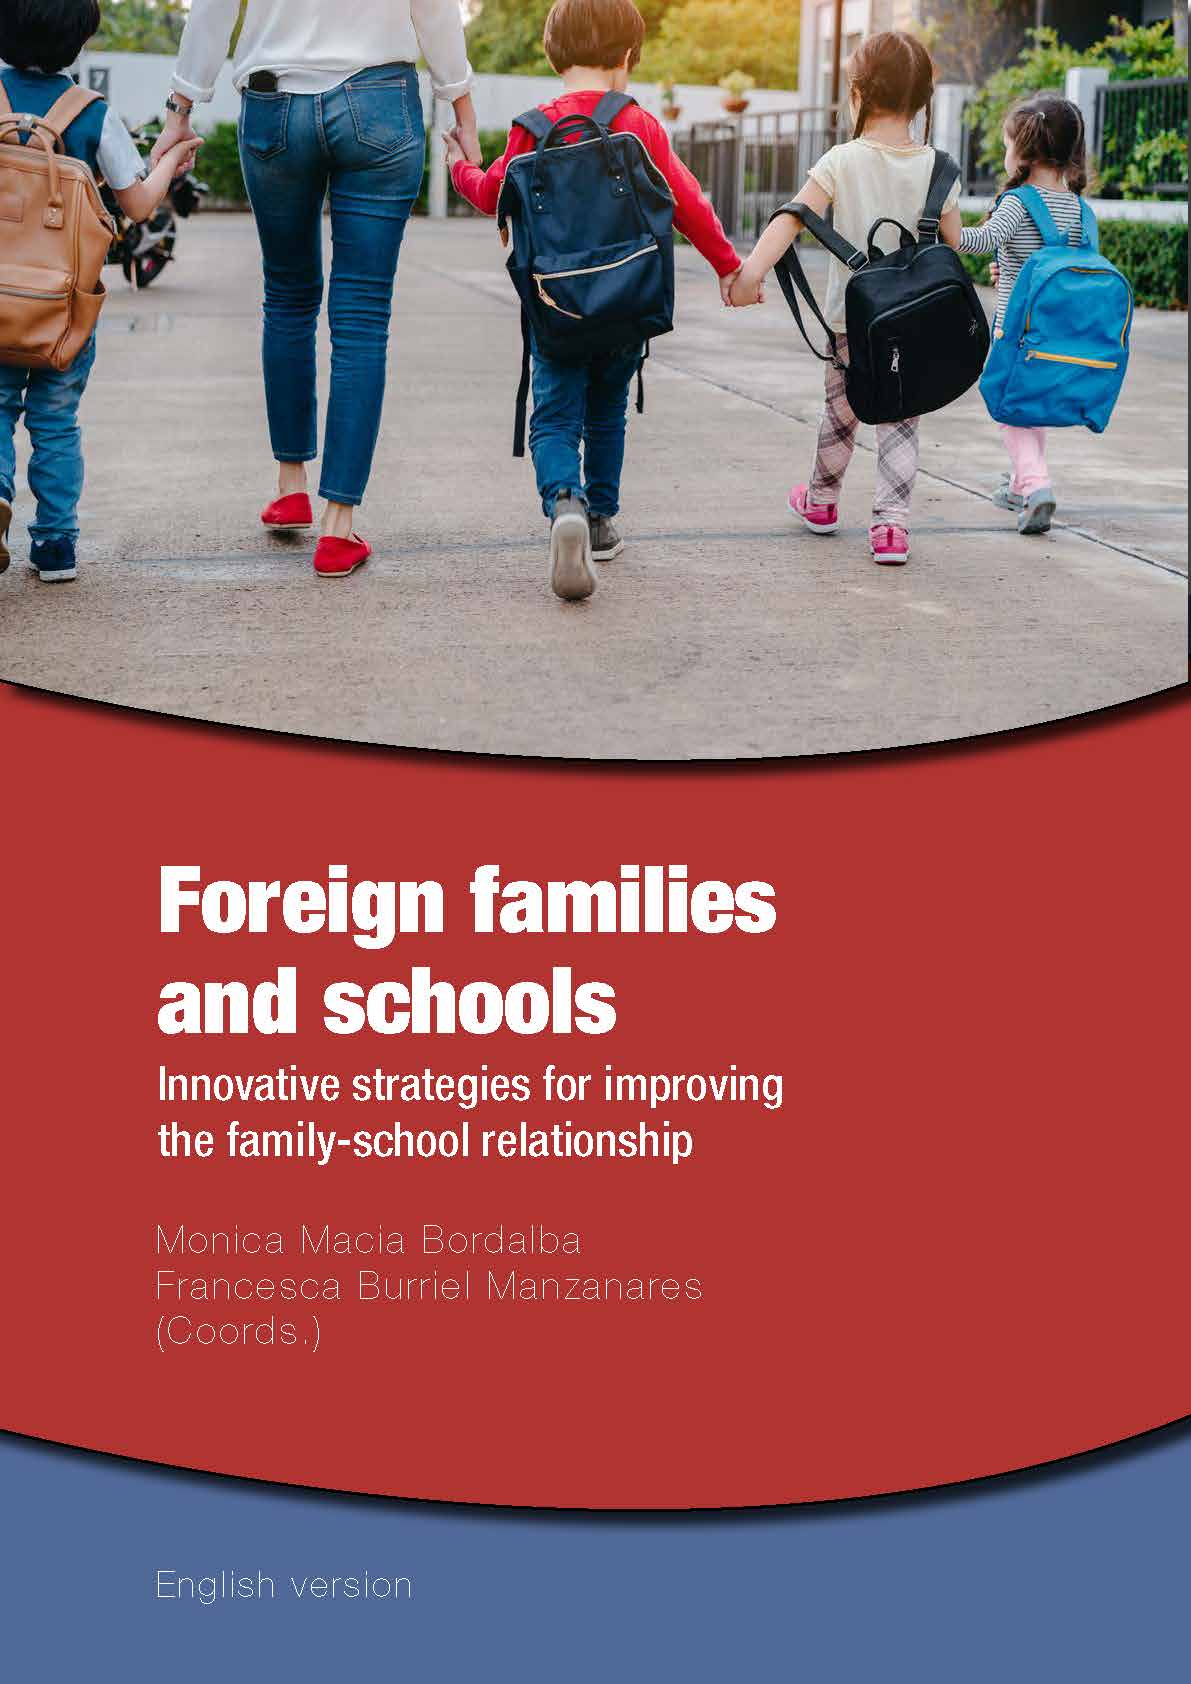 Foreign families and schools. English Version